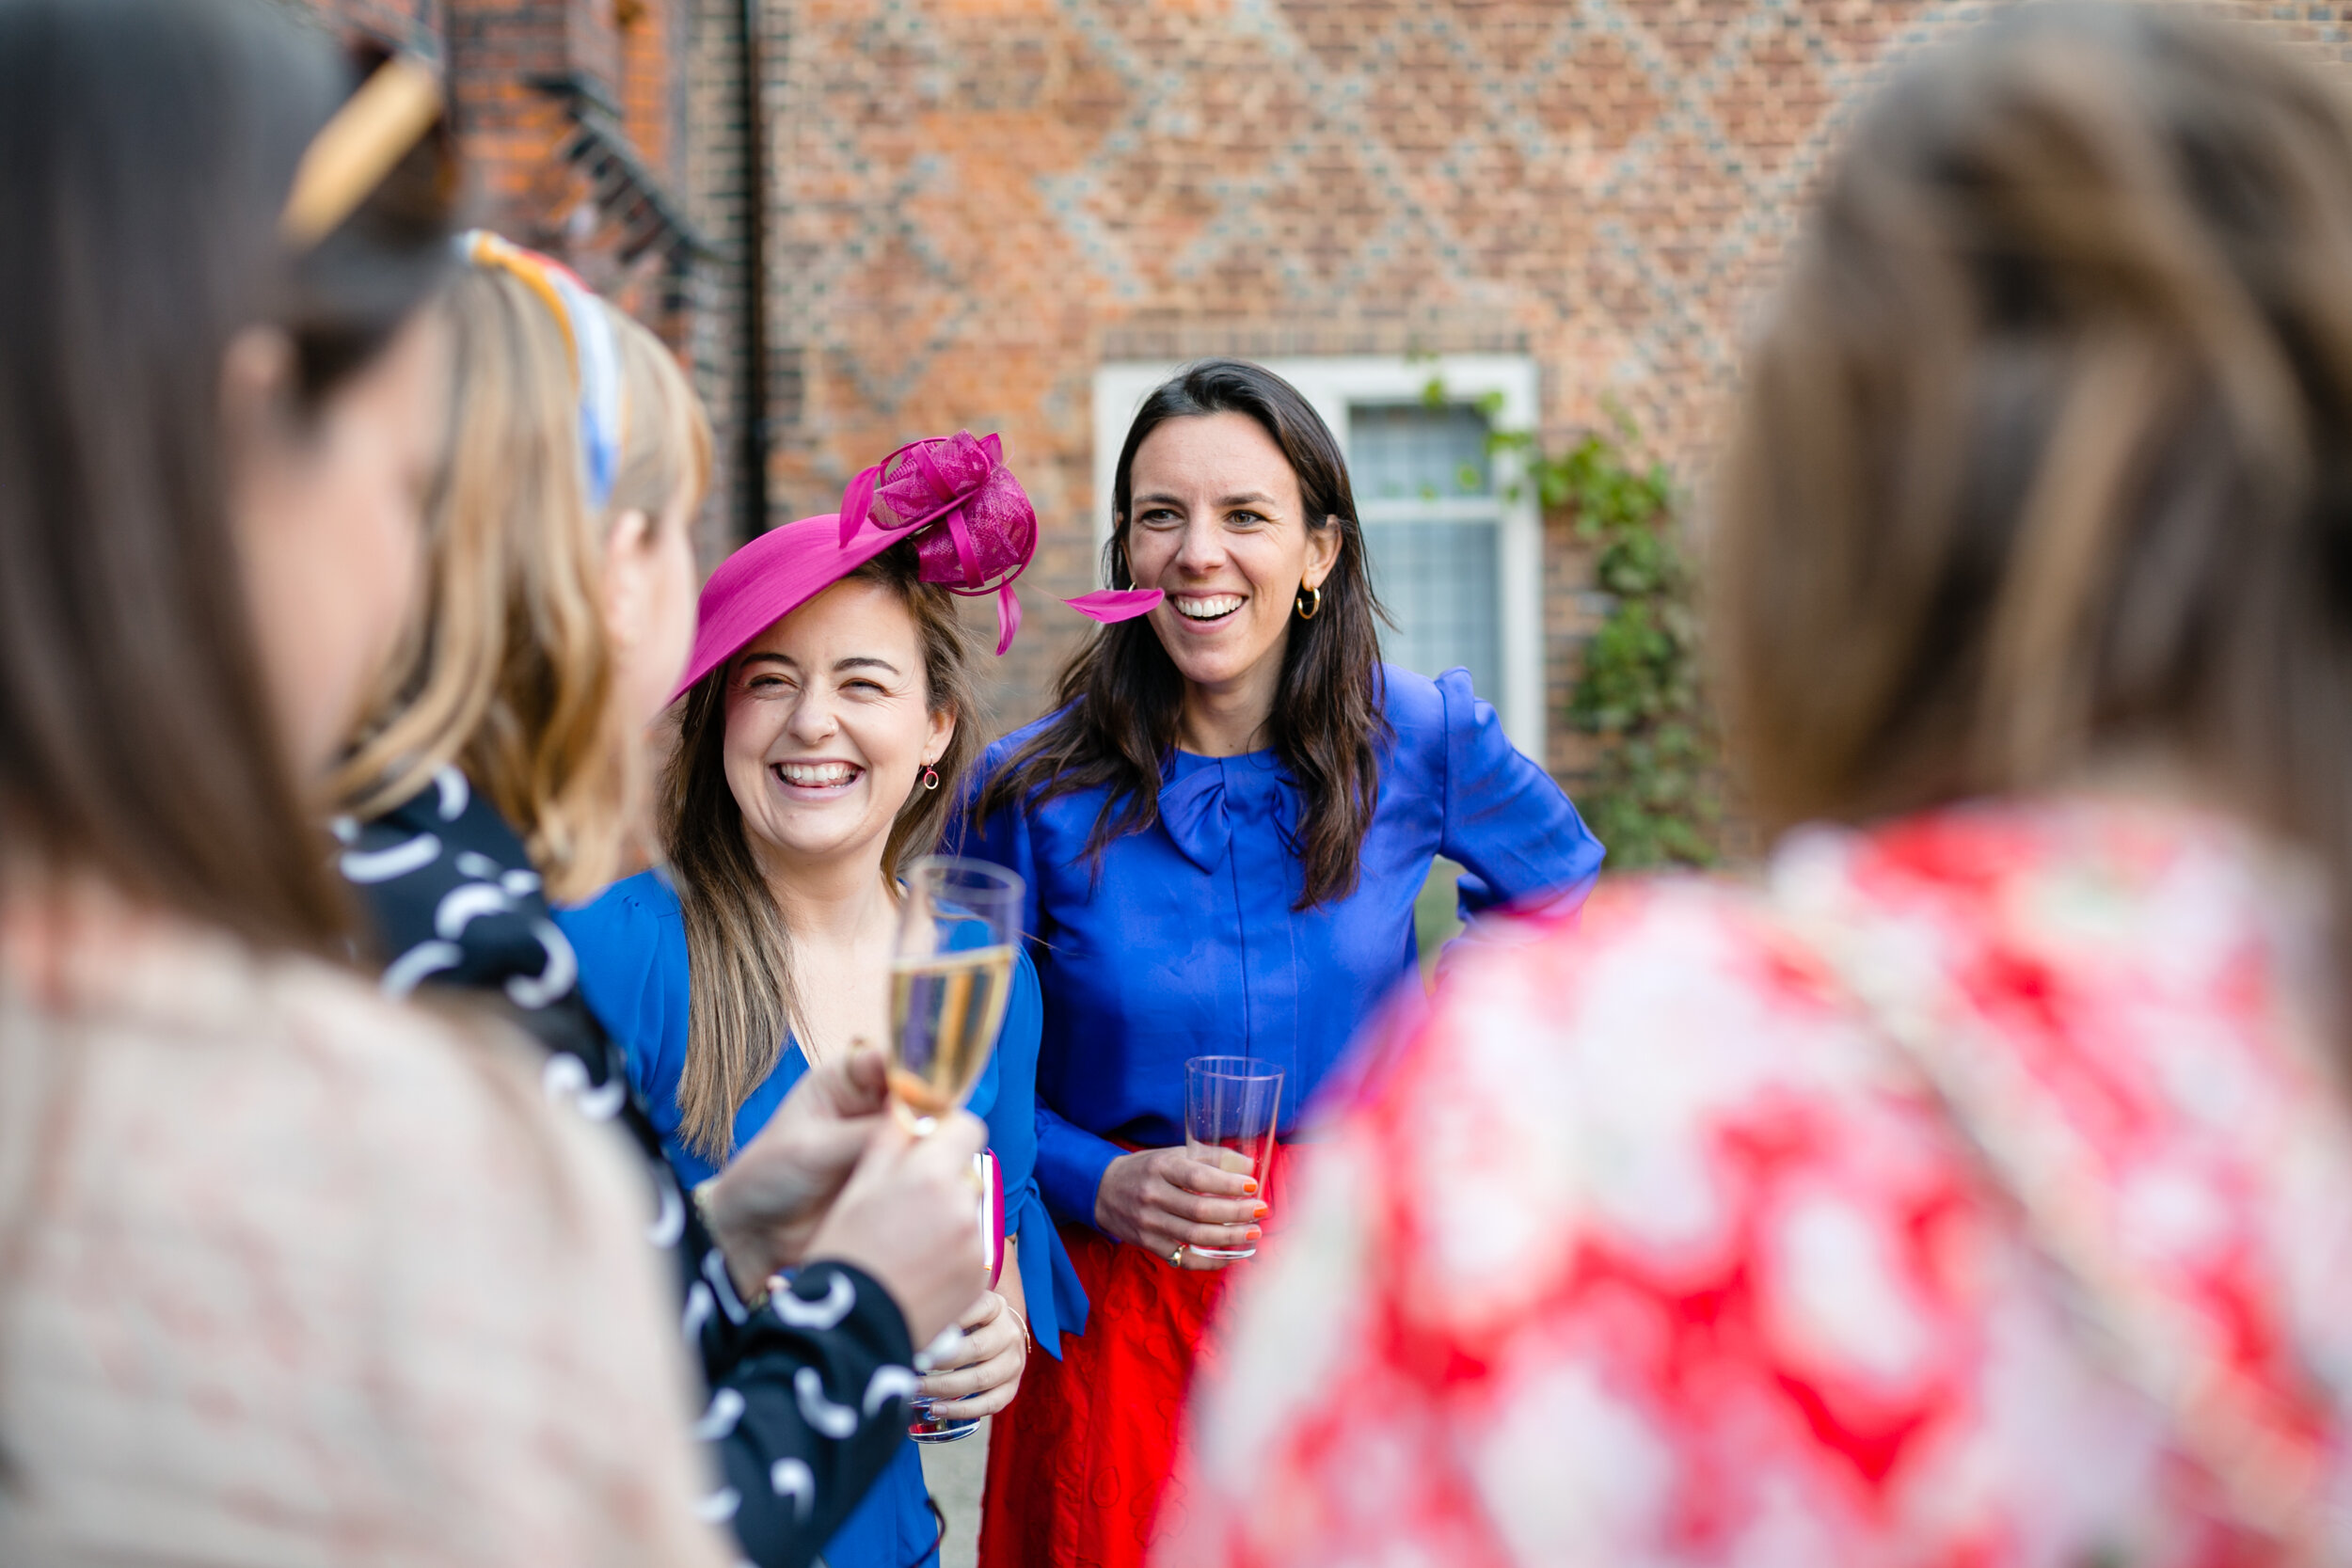 laughing wedding guests photo Fulham Palace